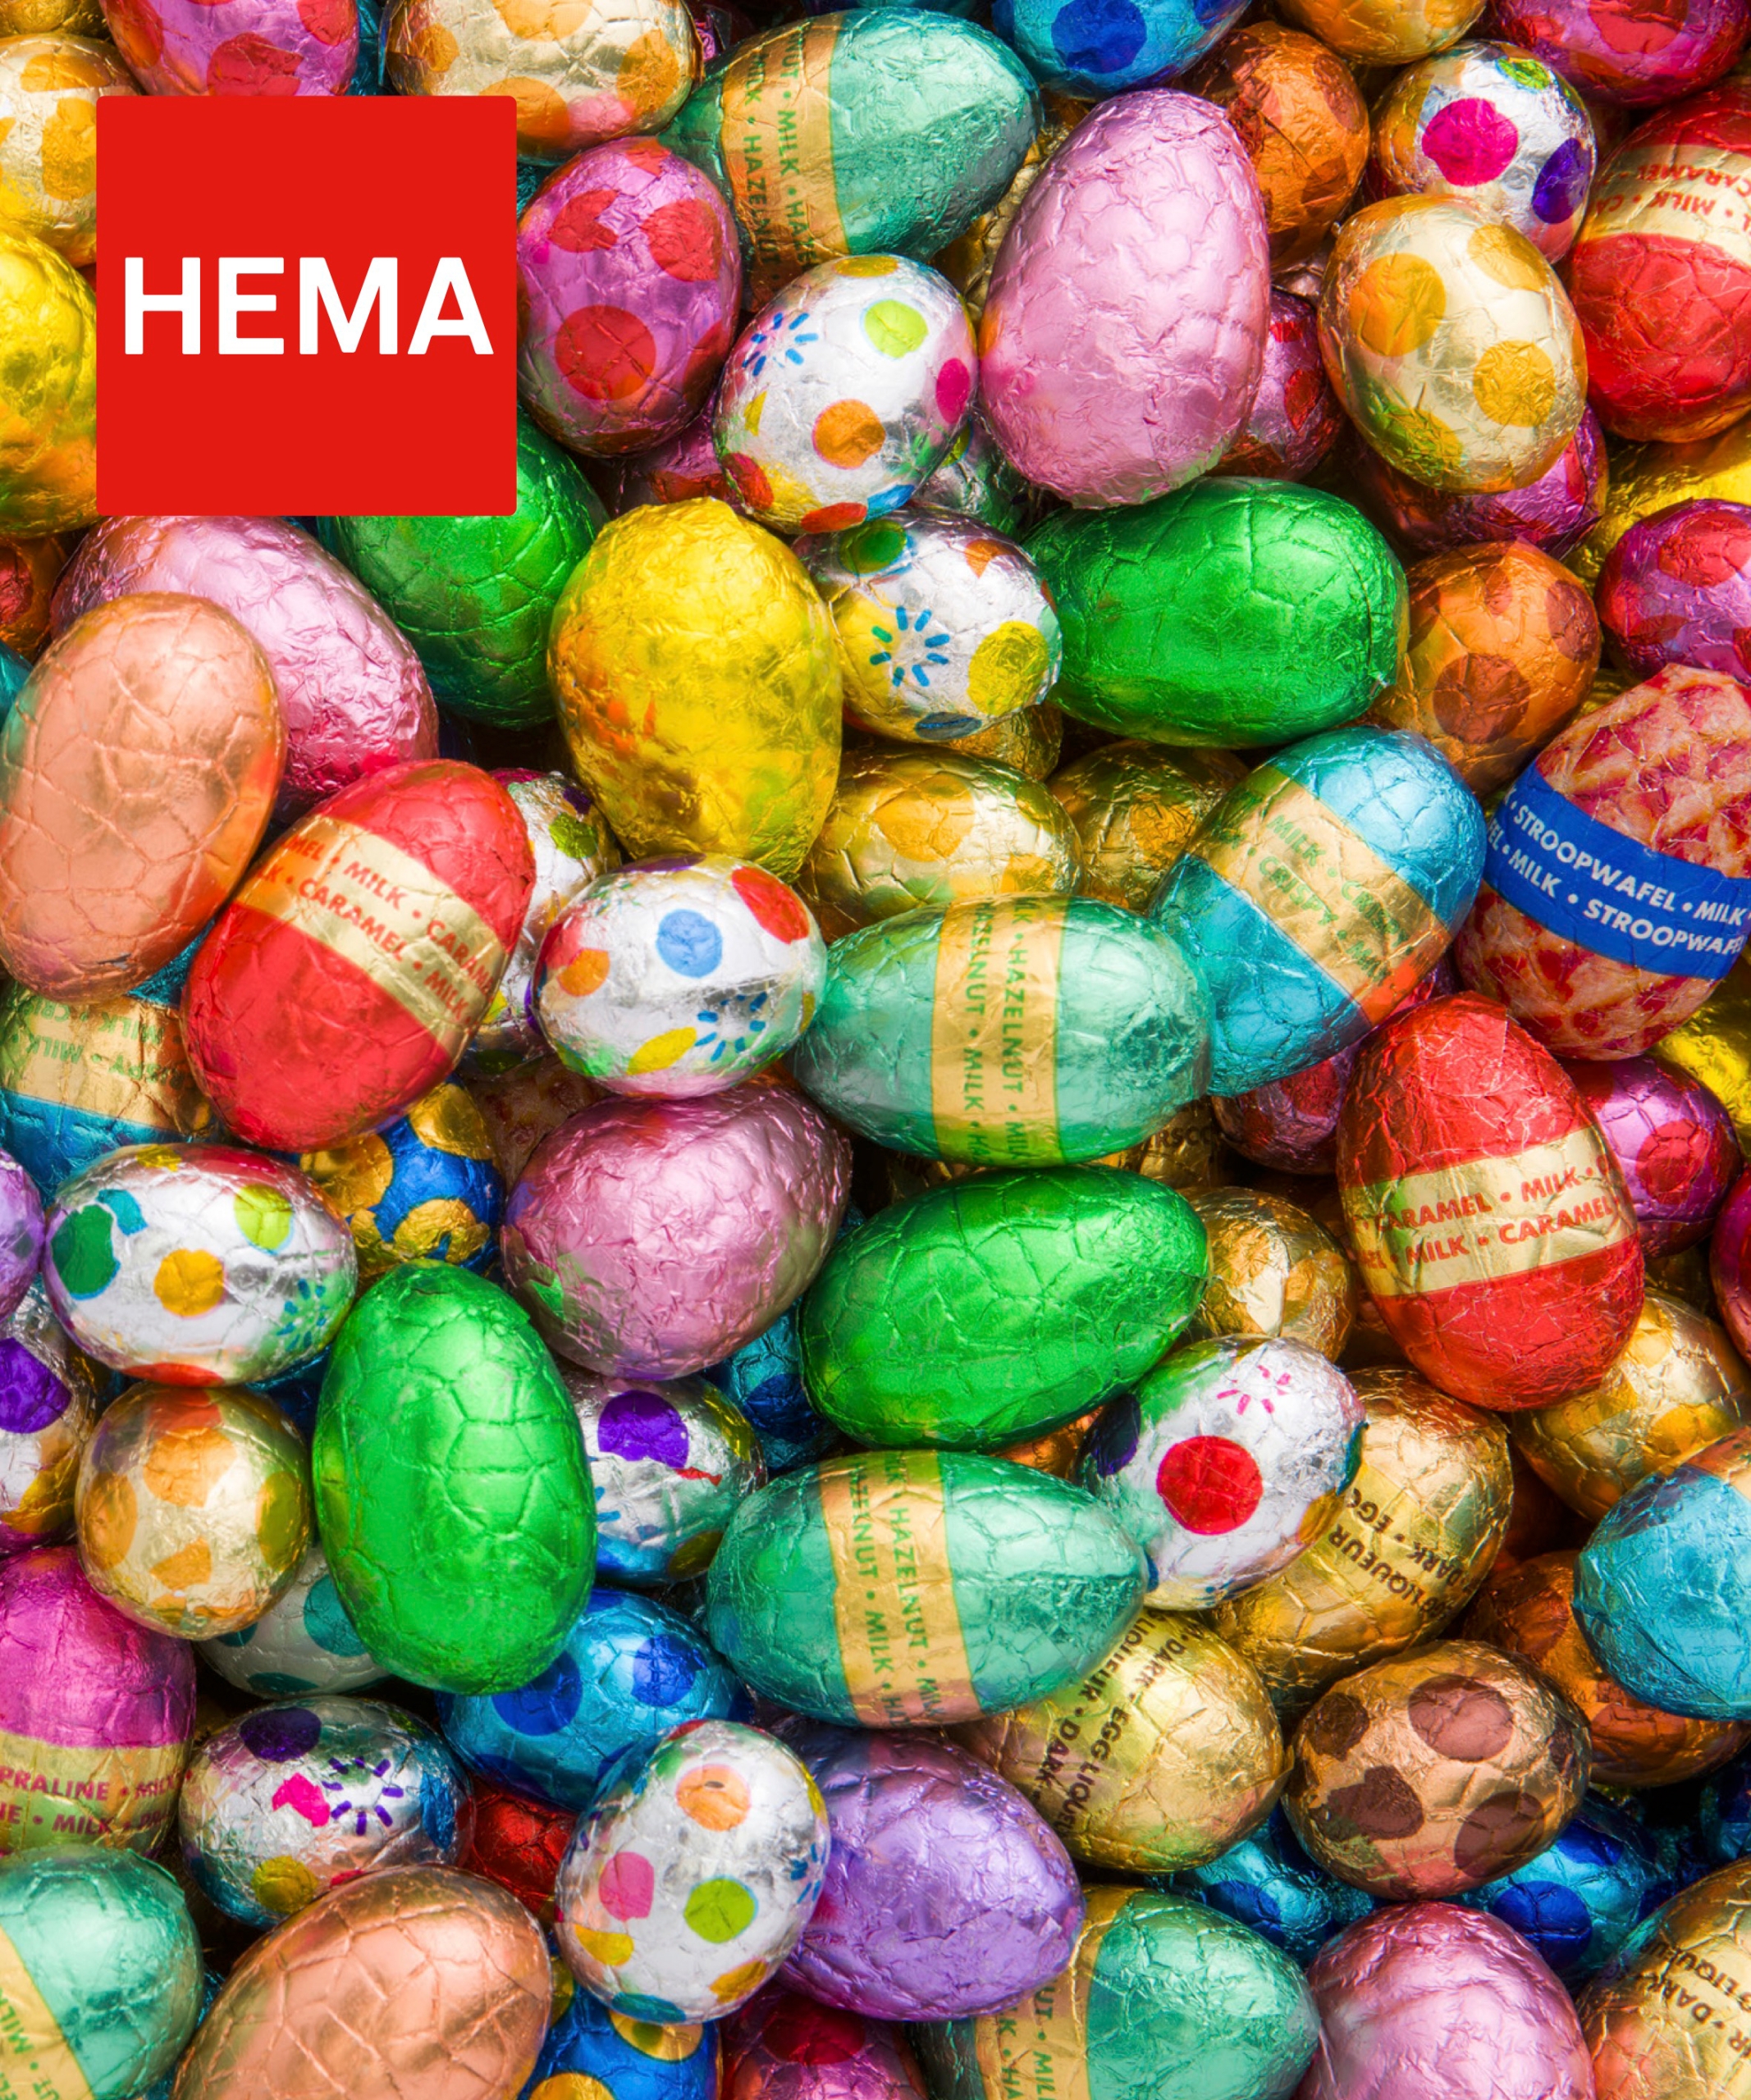 A photo full of chocolate Easter eggs. Being used as a cover for Easter.